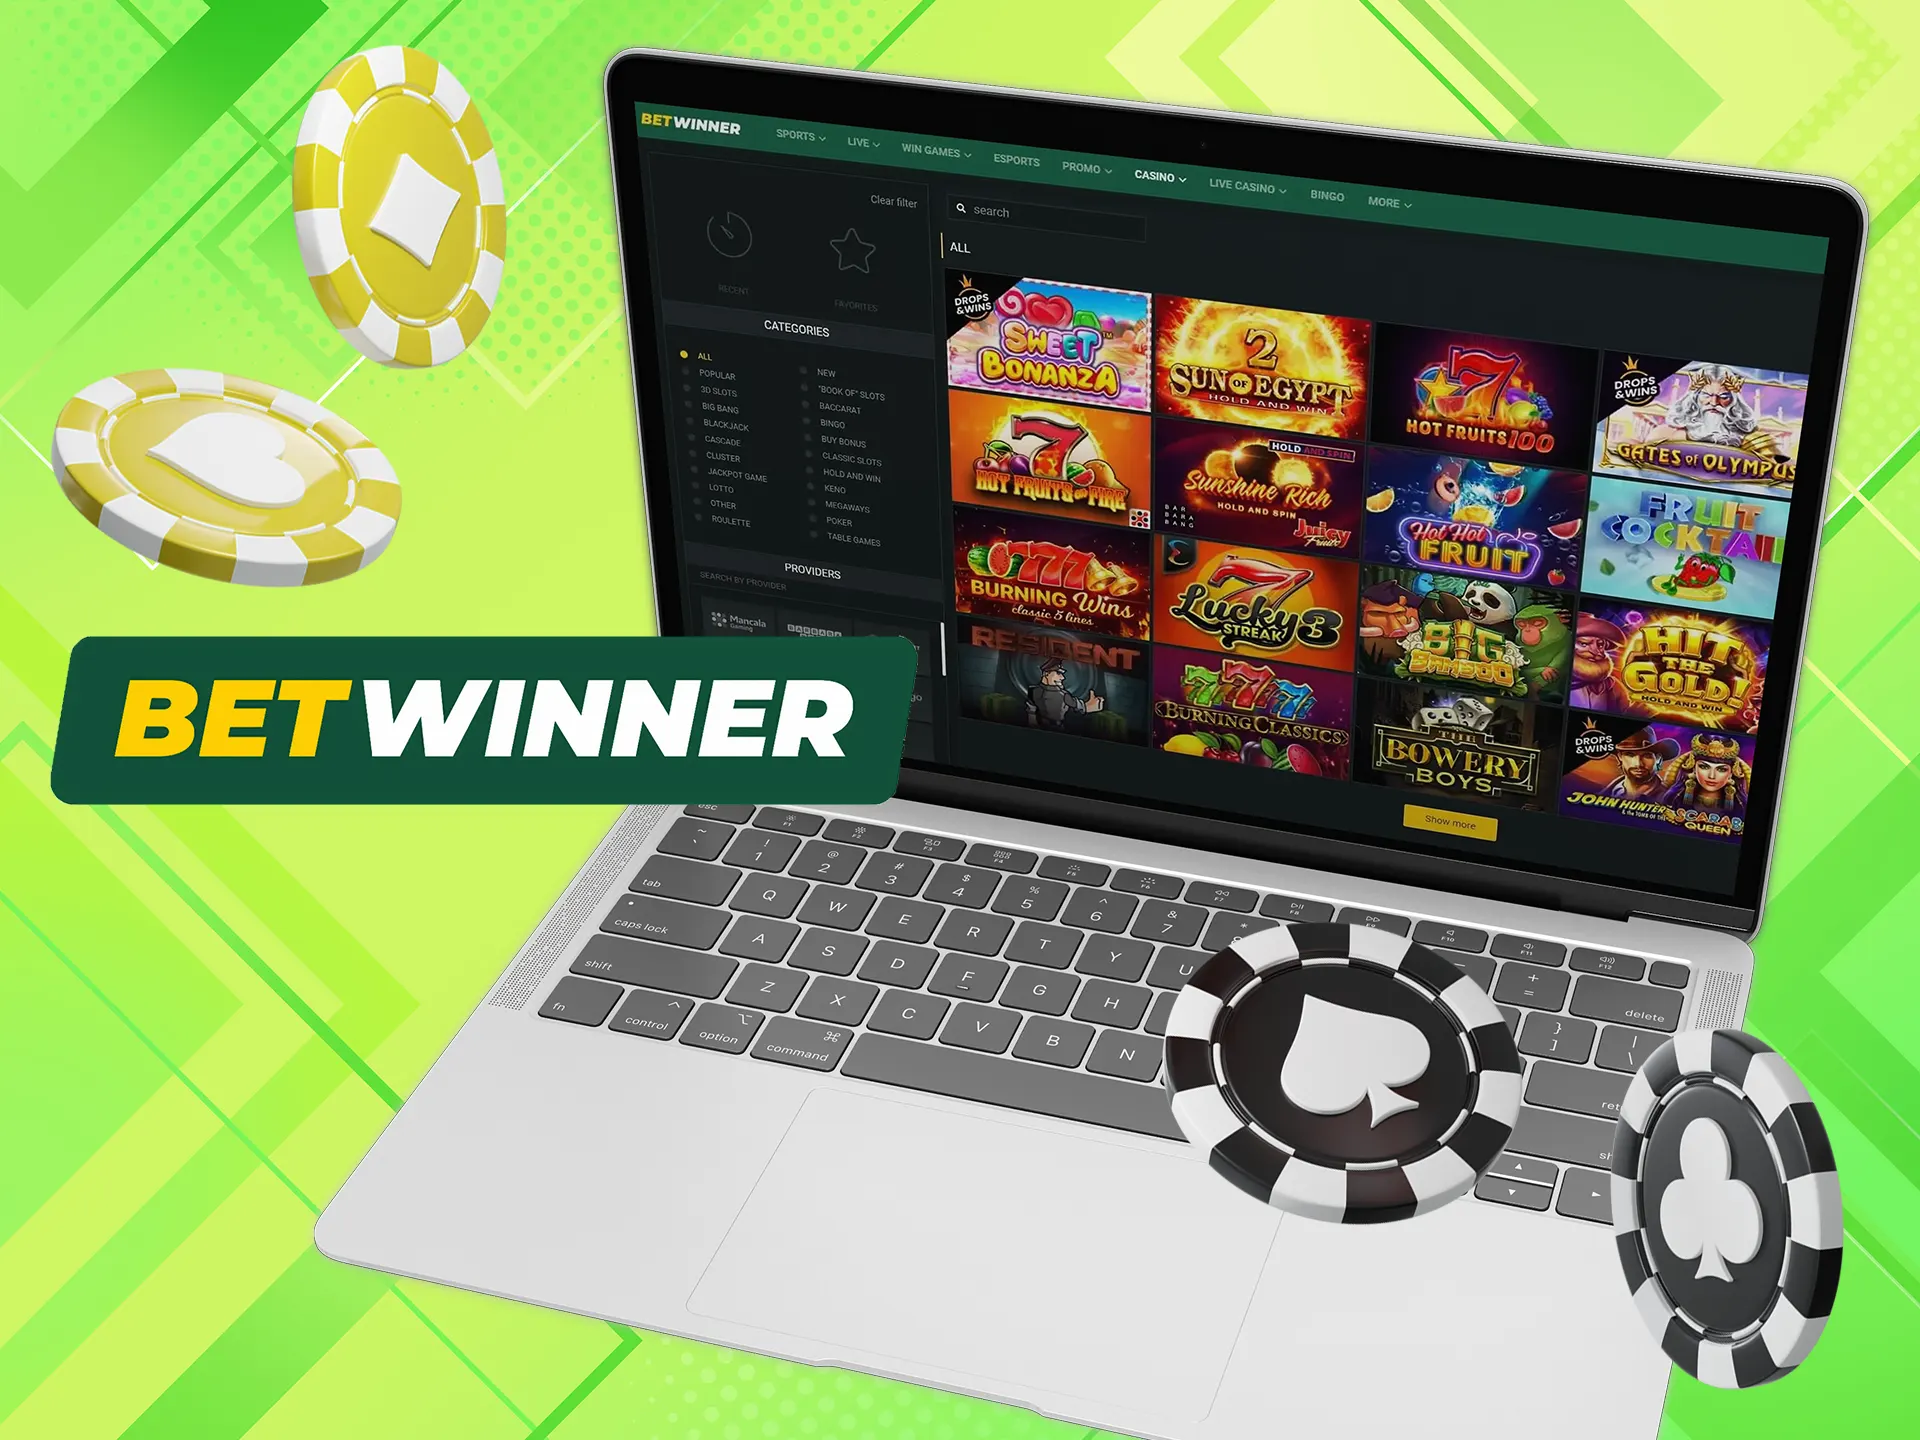 Betwinner casino is a great place for playing casino games.